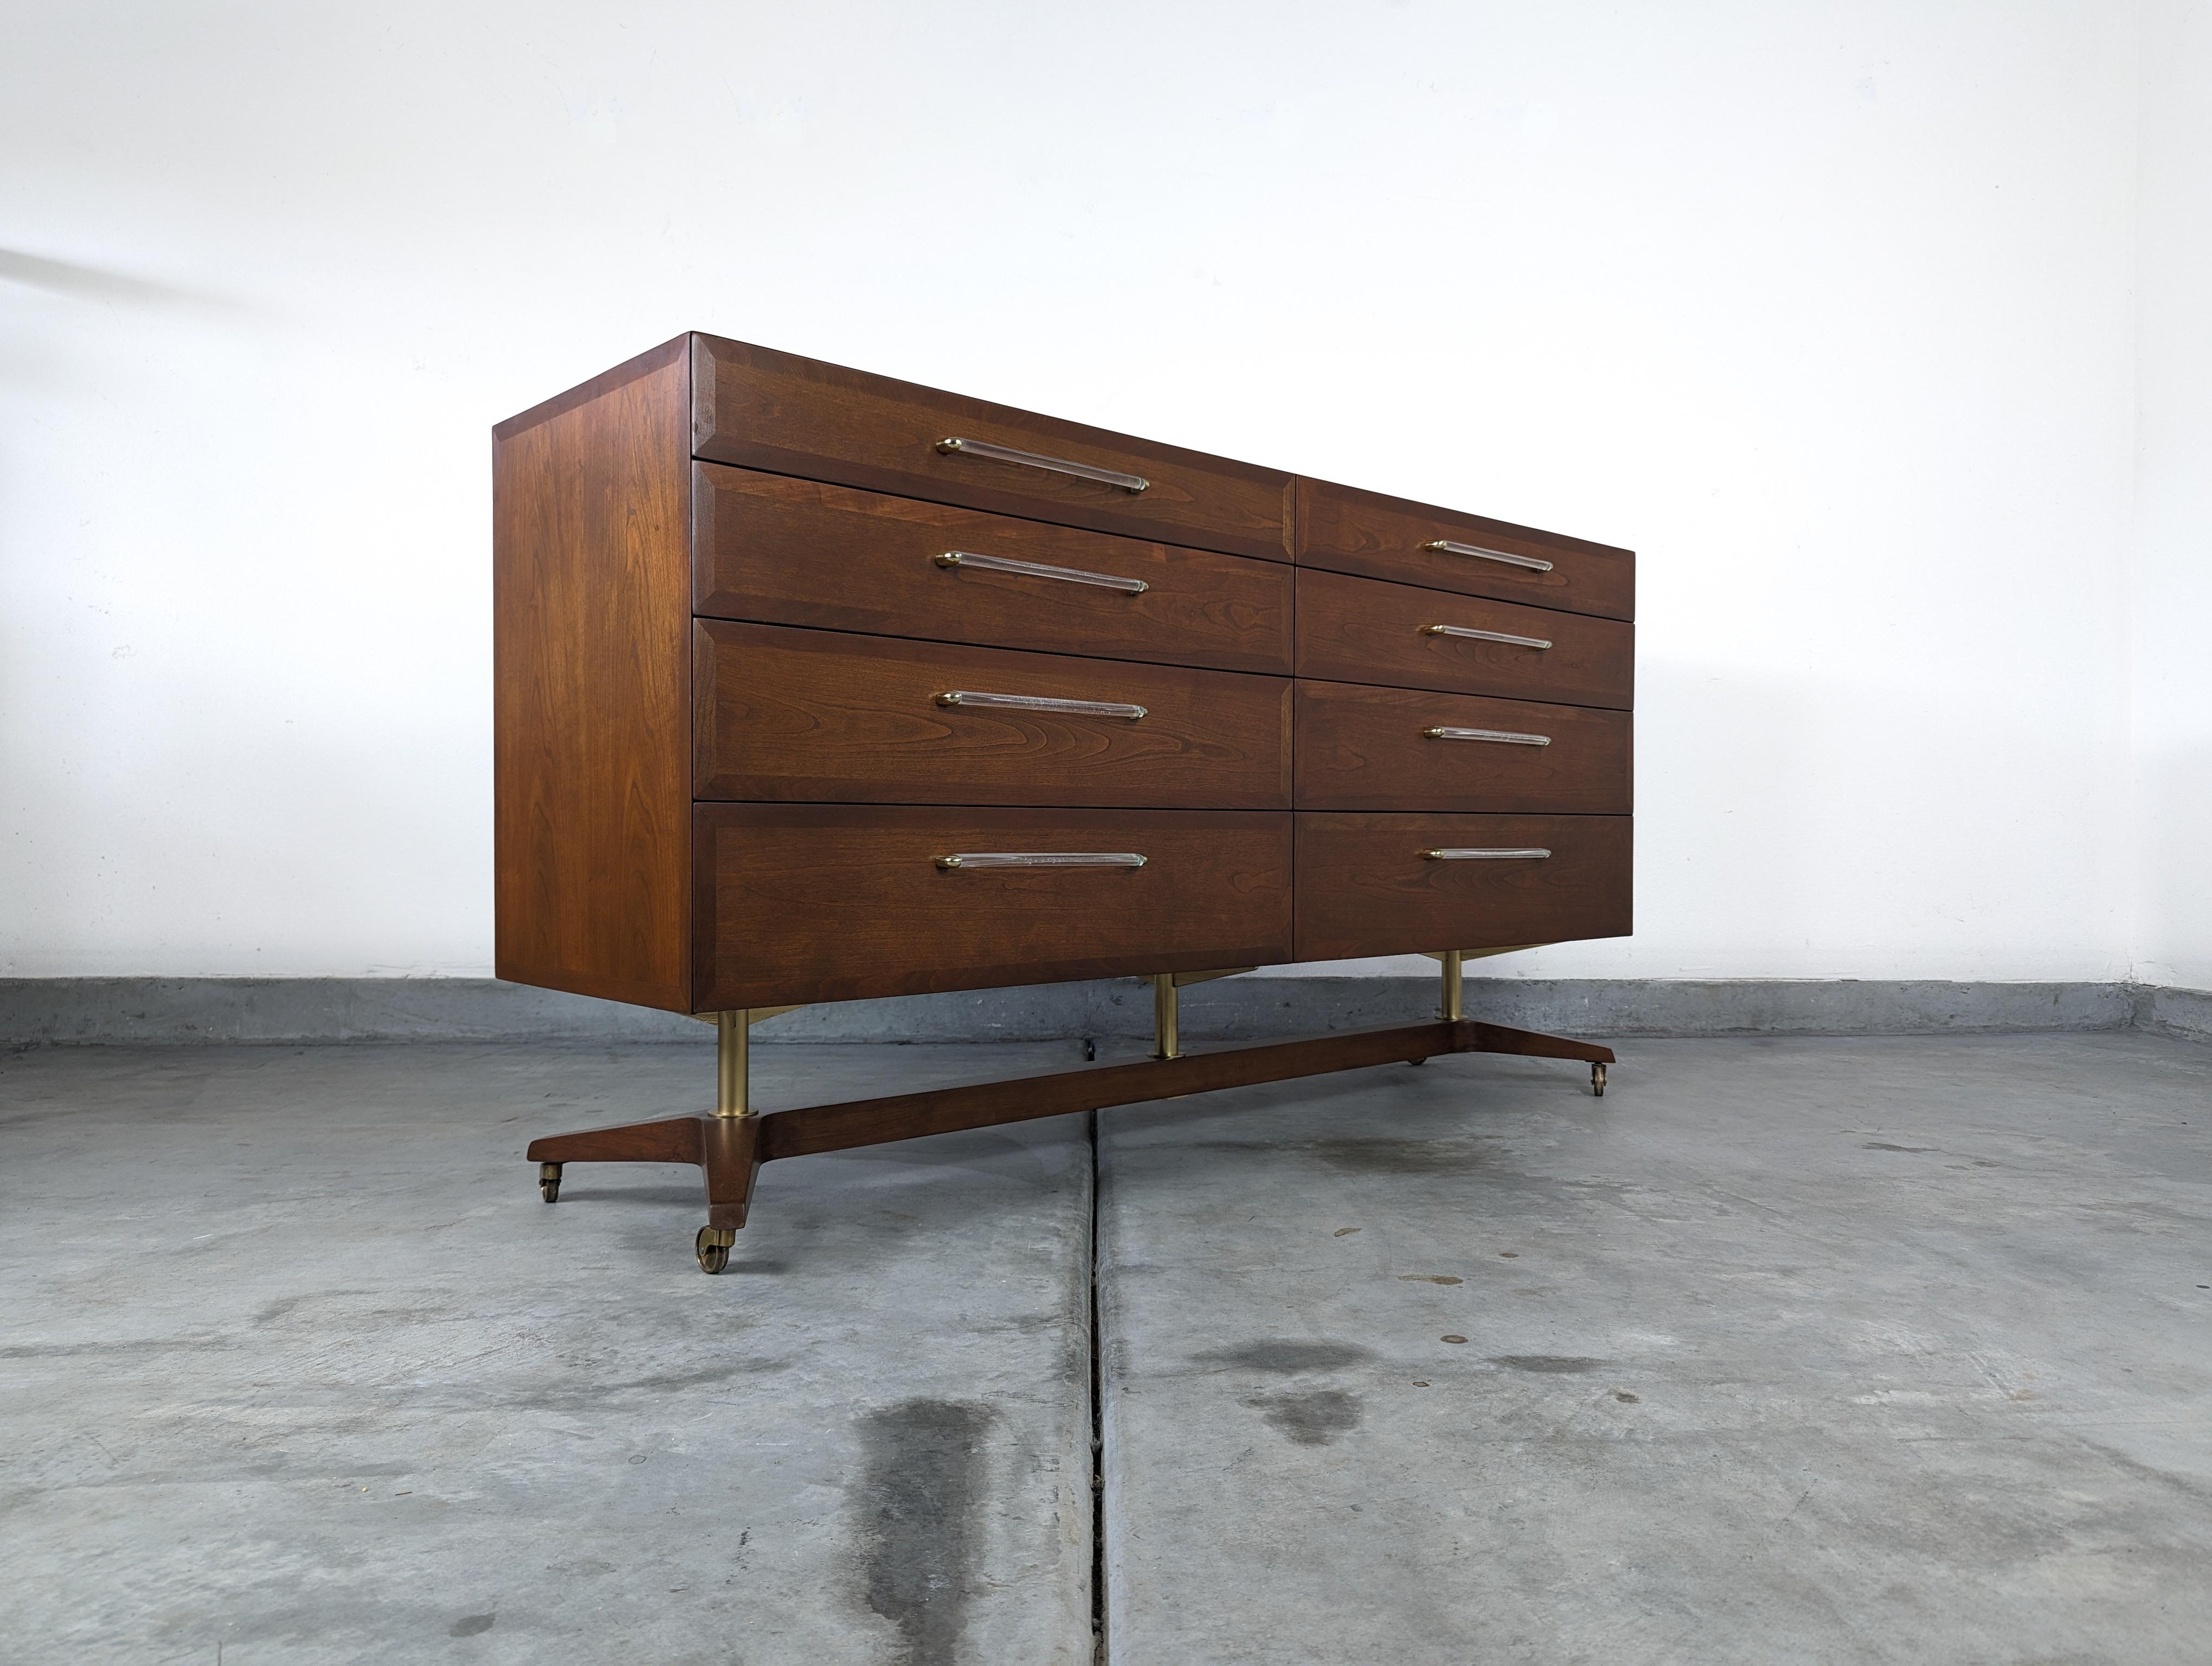 Behold an exceptional treasure of design history, a vintage mid-century modern walnut dresser crafted by the iconic Edward Wormley for Dunbar, circa 1950s. This exquisite piece is an extraordinary find, seldom seen on the market and coveted by